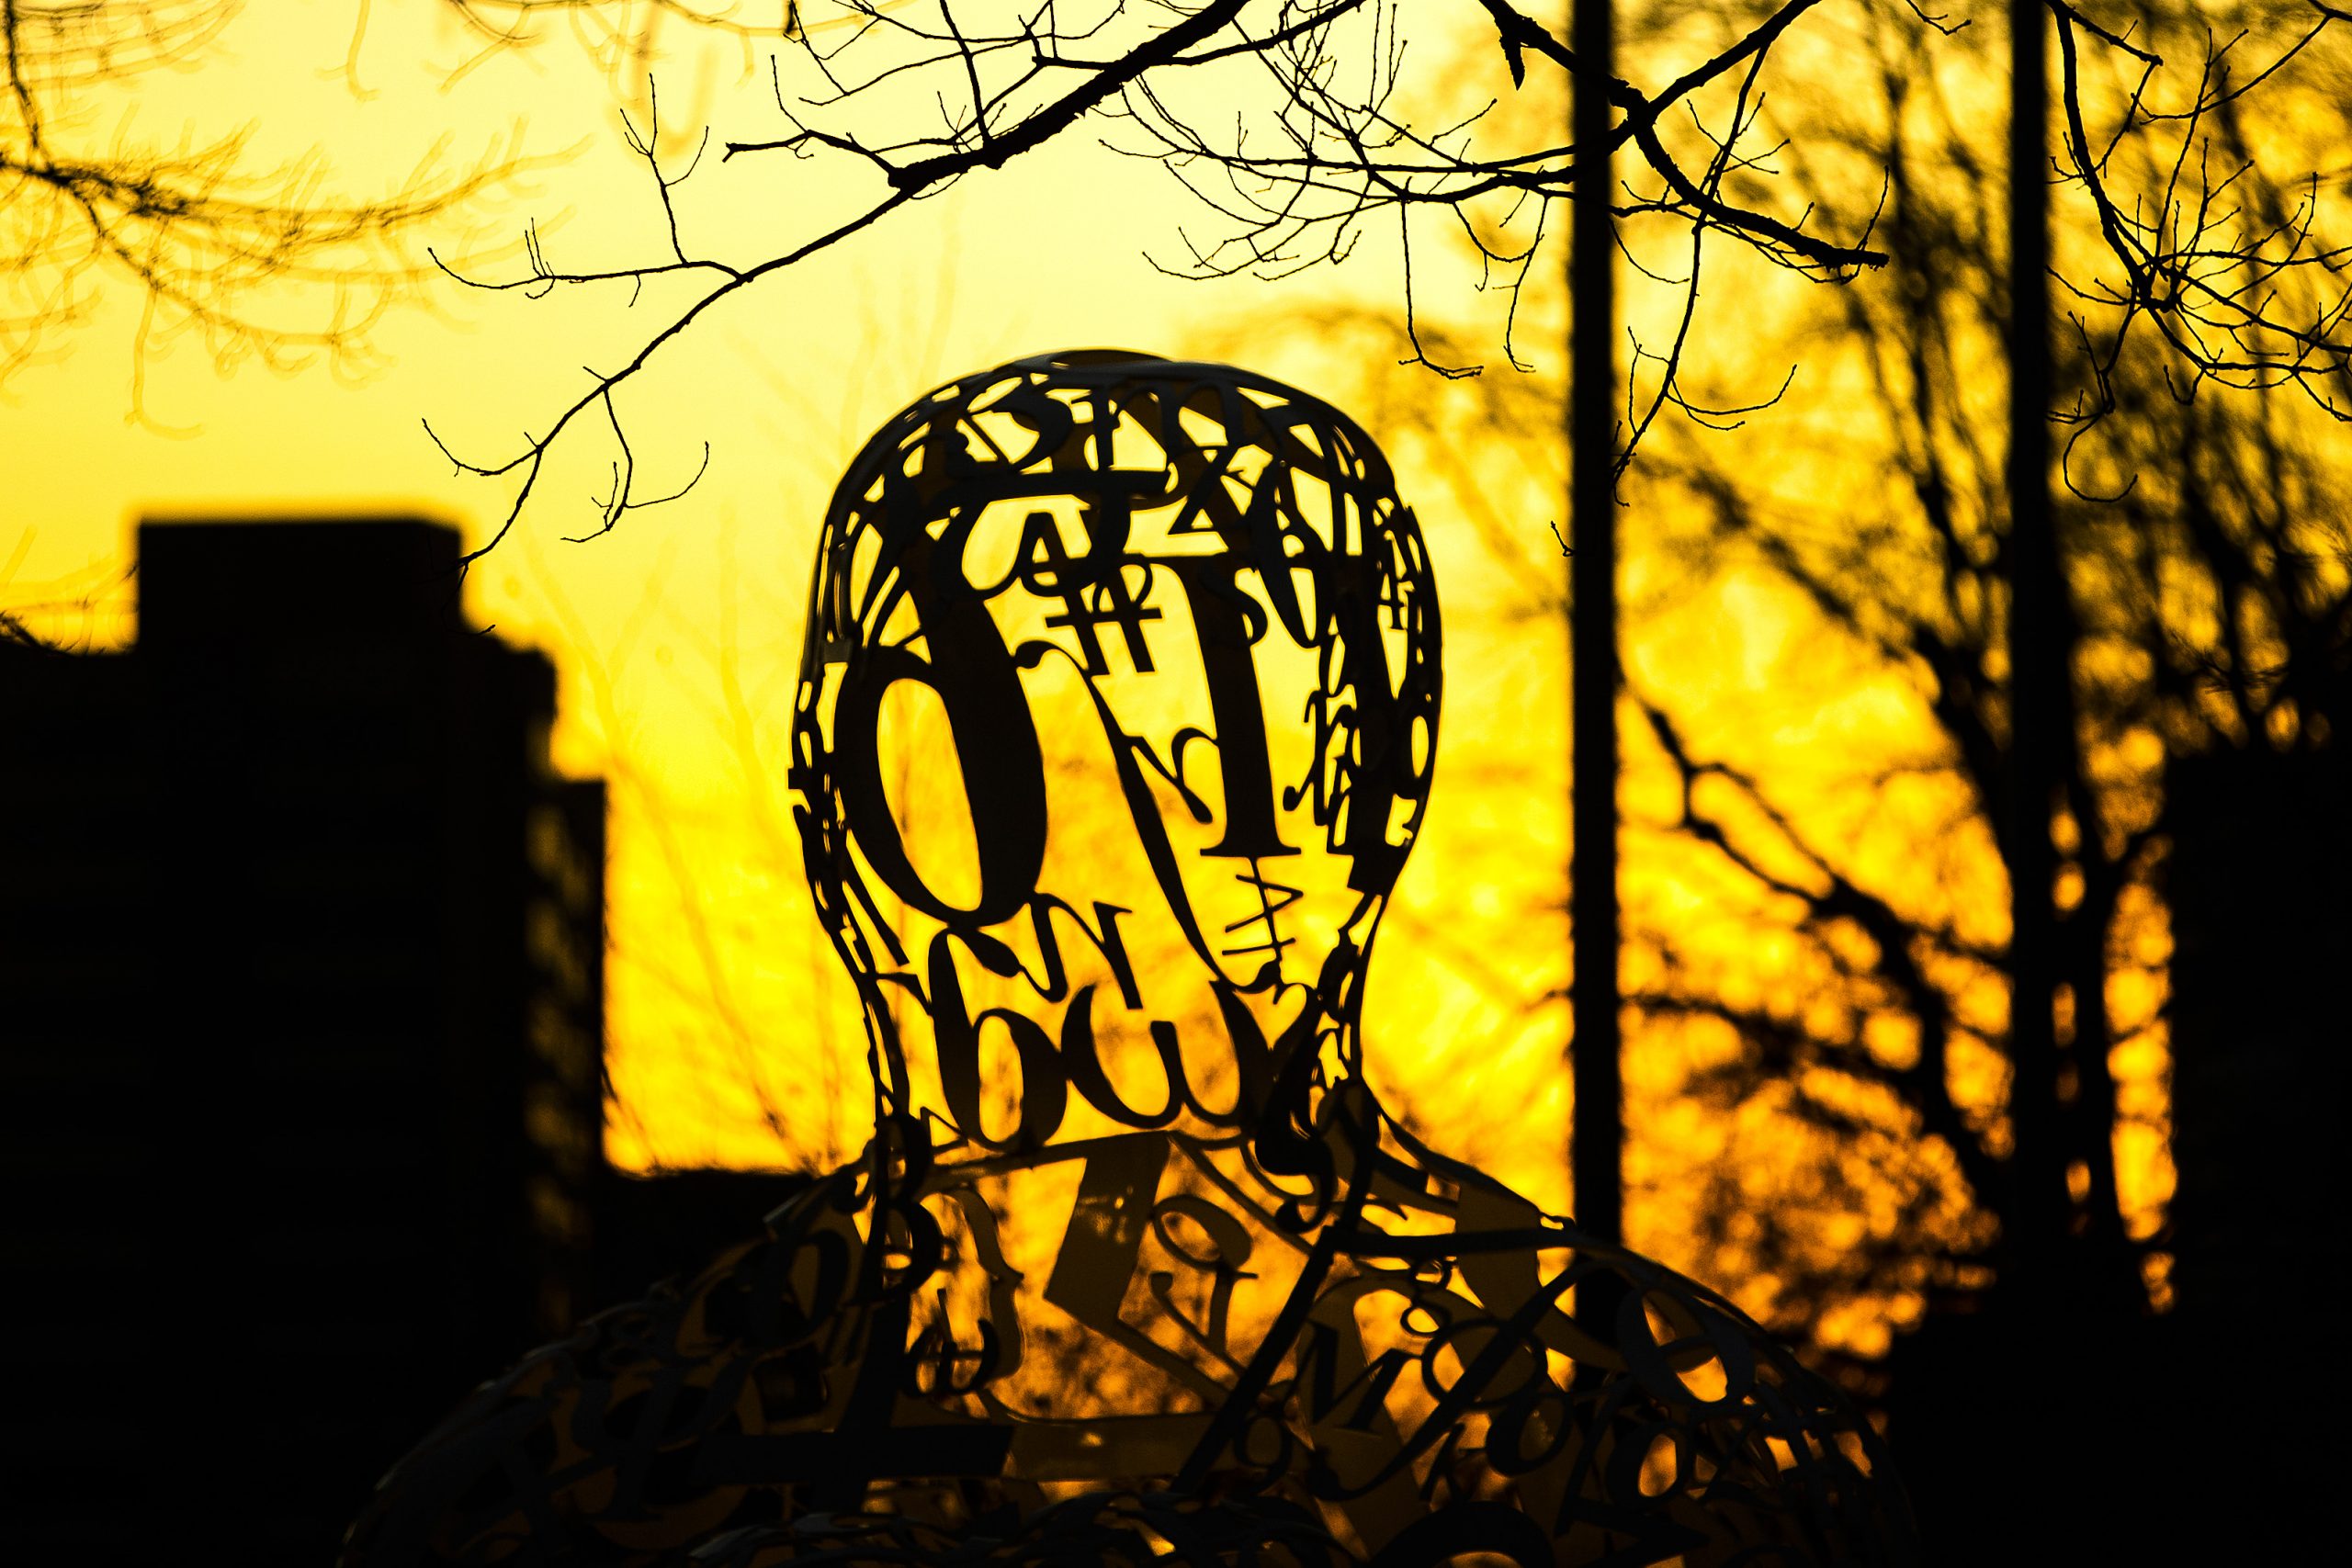 A silhouette of an art installation on MITs campus as the sun sets on December 15, 2020 in Cambridge, Massachusetts.